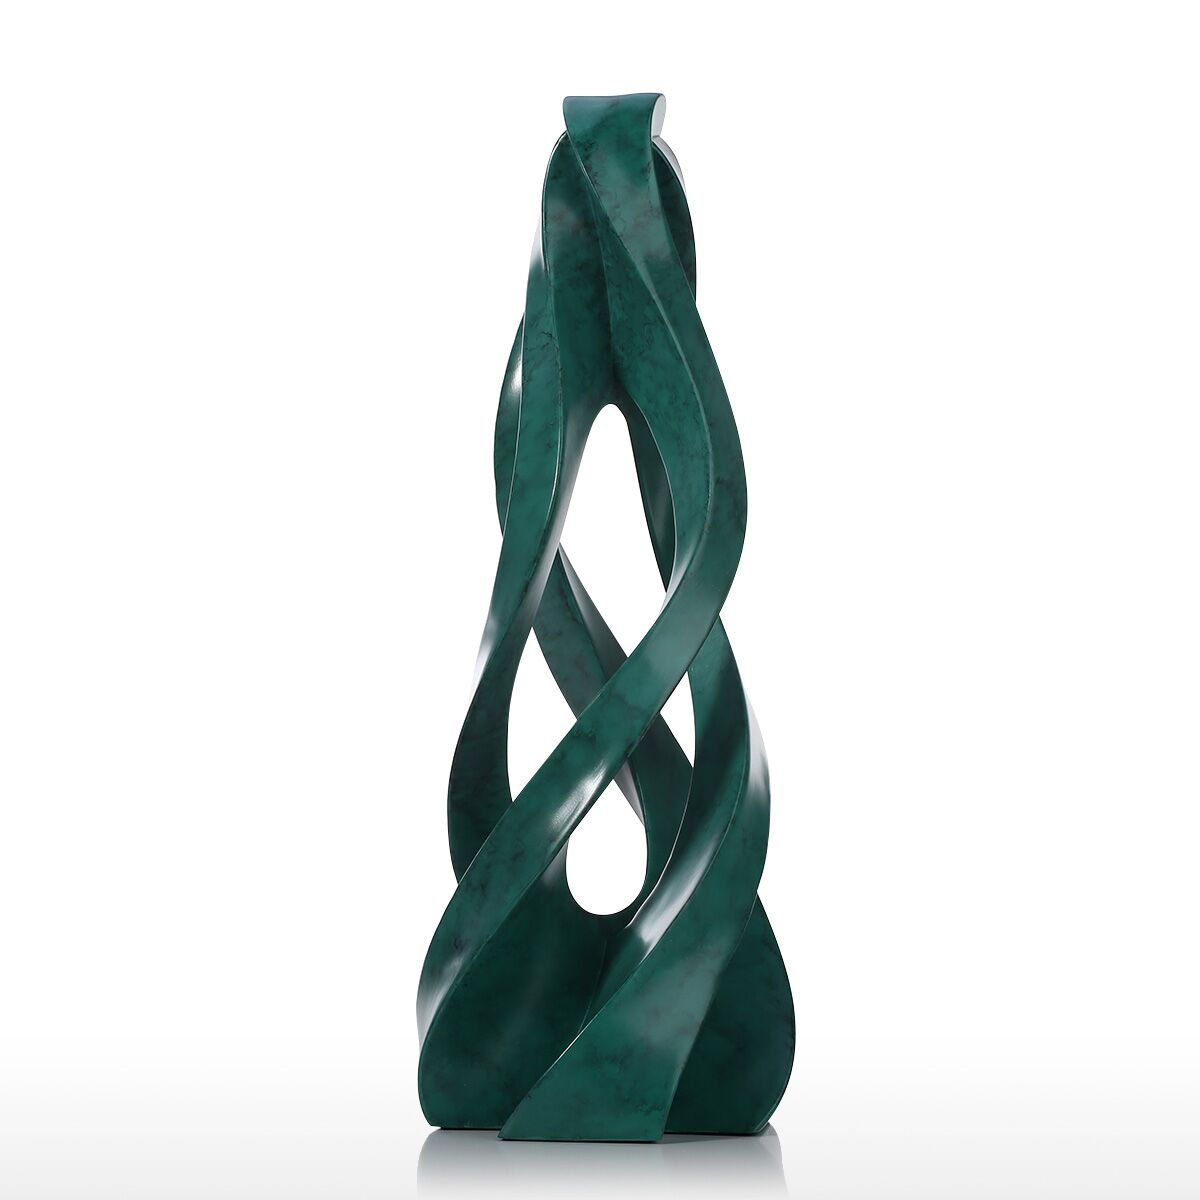 Ao78 Gathering Together Abstract Resin Bronze Sculpture - 5.9 X 5.9 X 15.7 In.